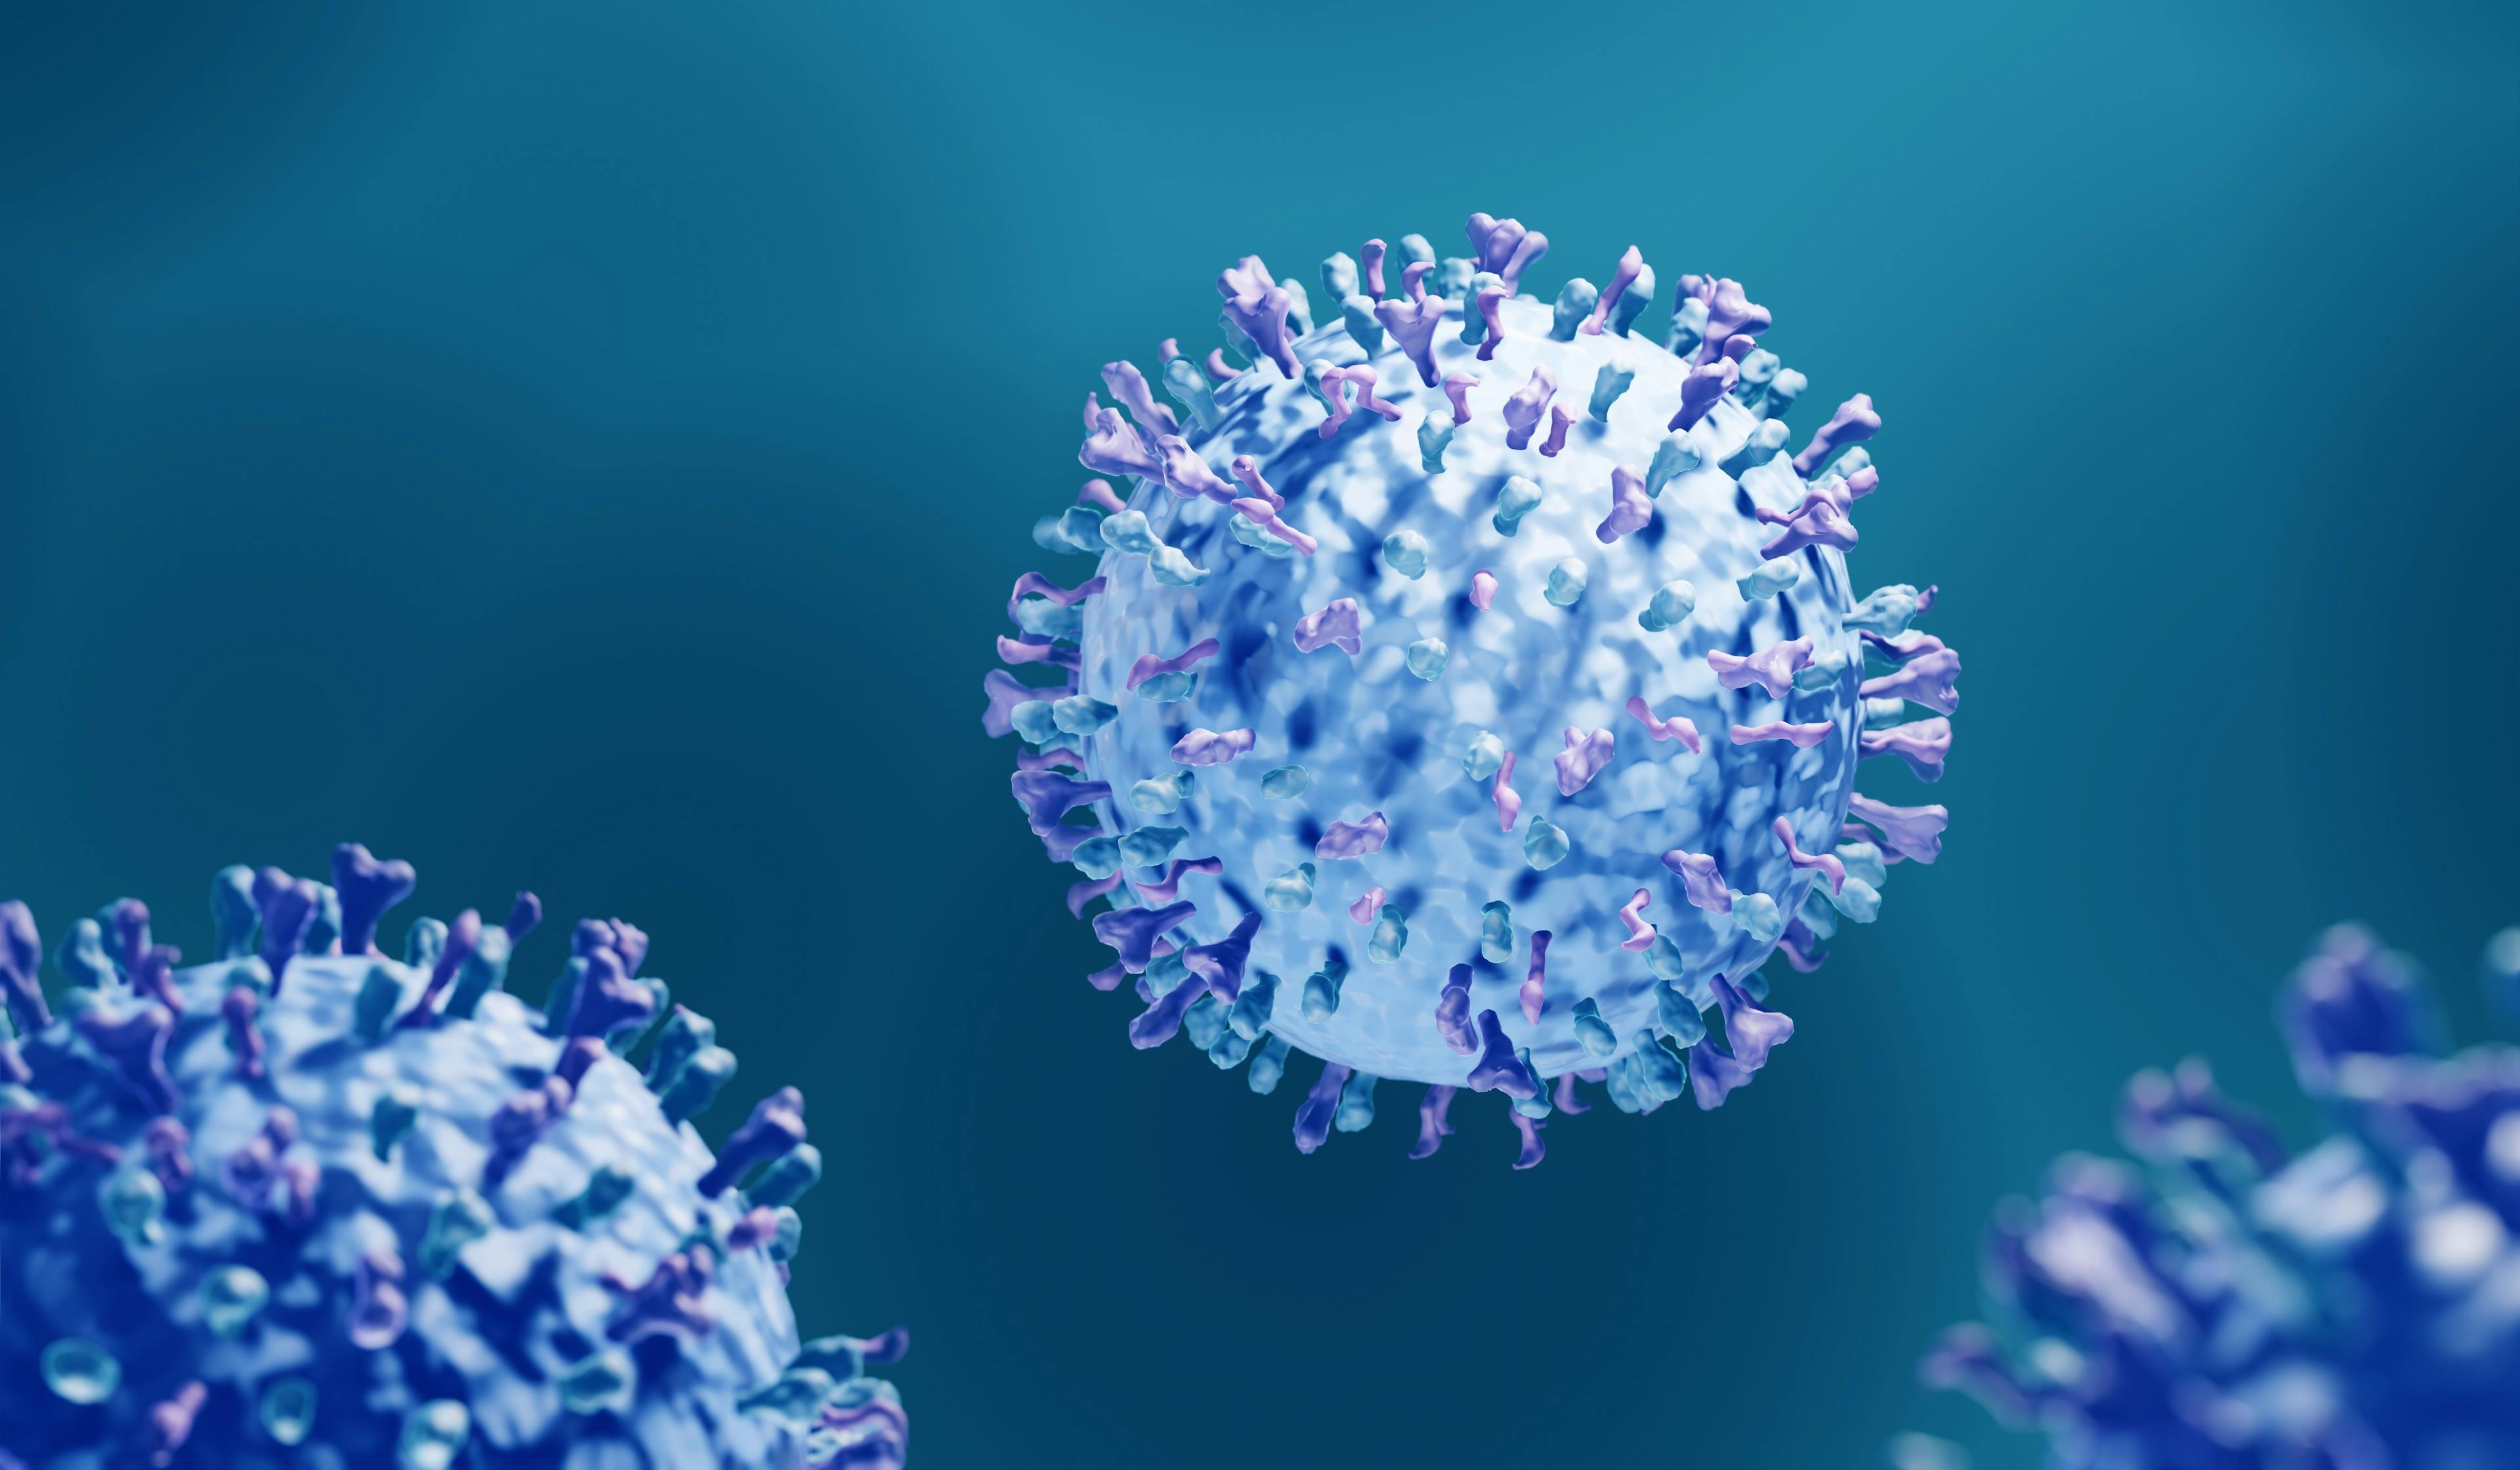 Infectious viruses such as respiratory syncytial virus (RSV) causing respiratory infections - Image credit: Artur | stocck.adobe.com